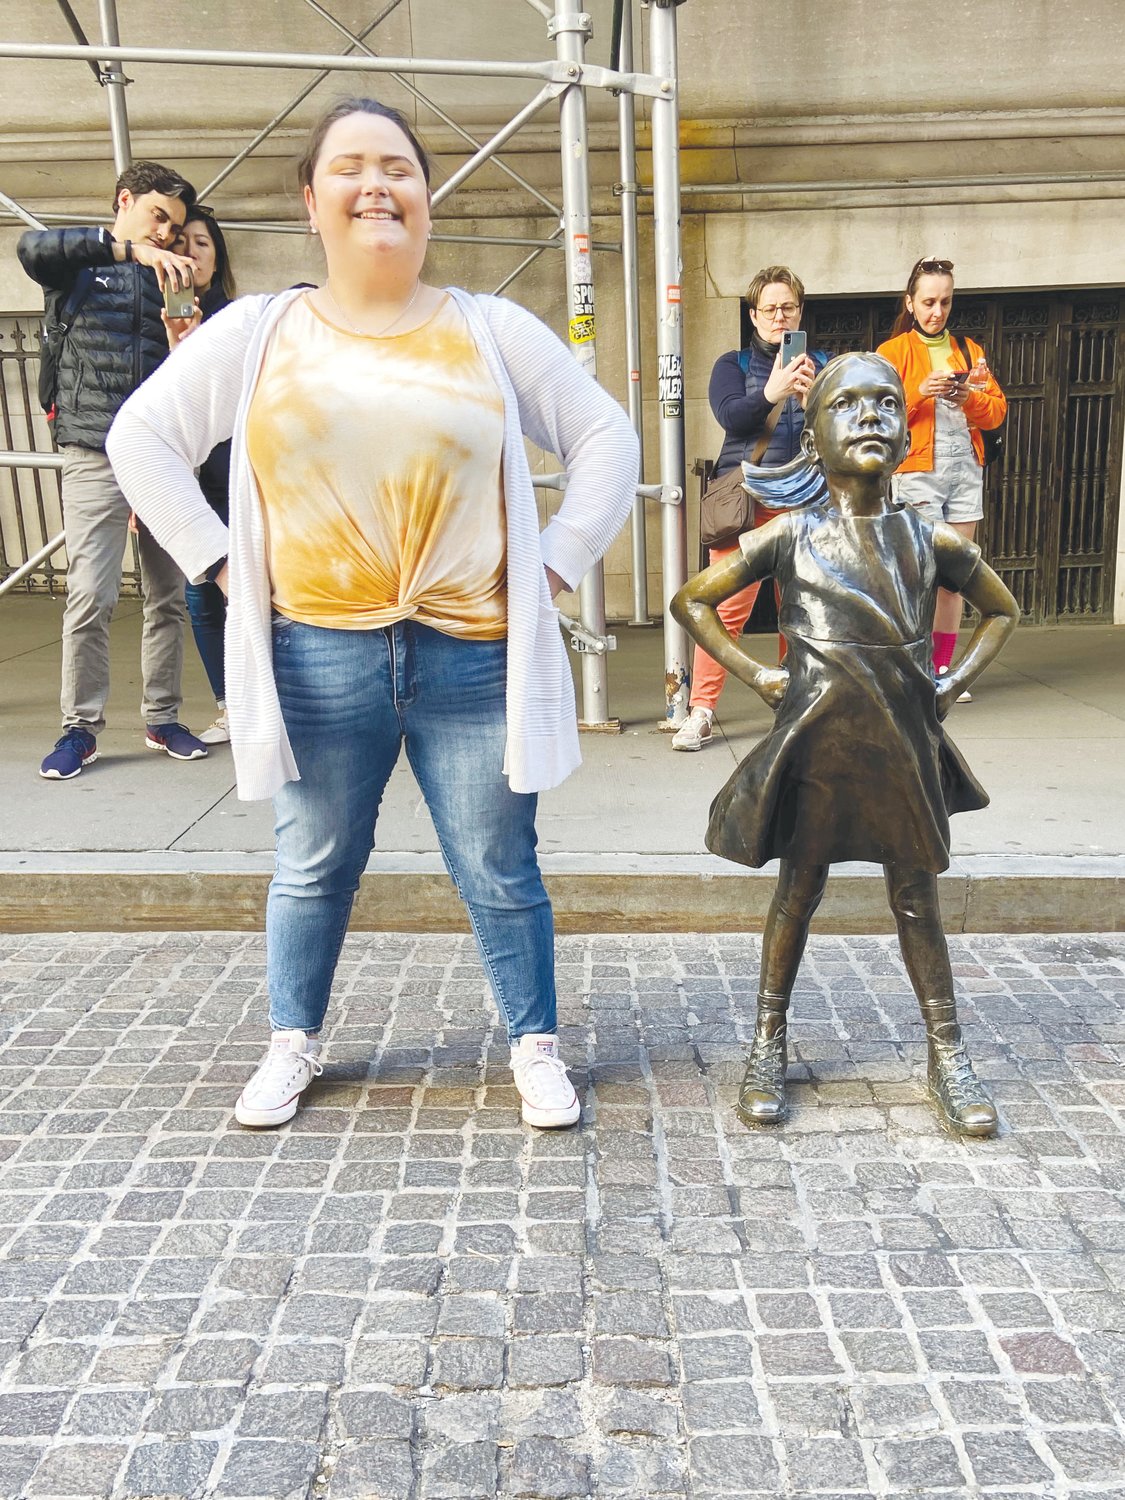 Laci Burt poses with the inspiring and popular 'Fearless Girl' statue on Wall Street.